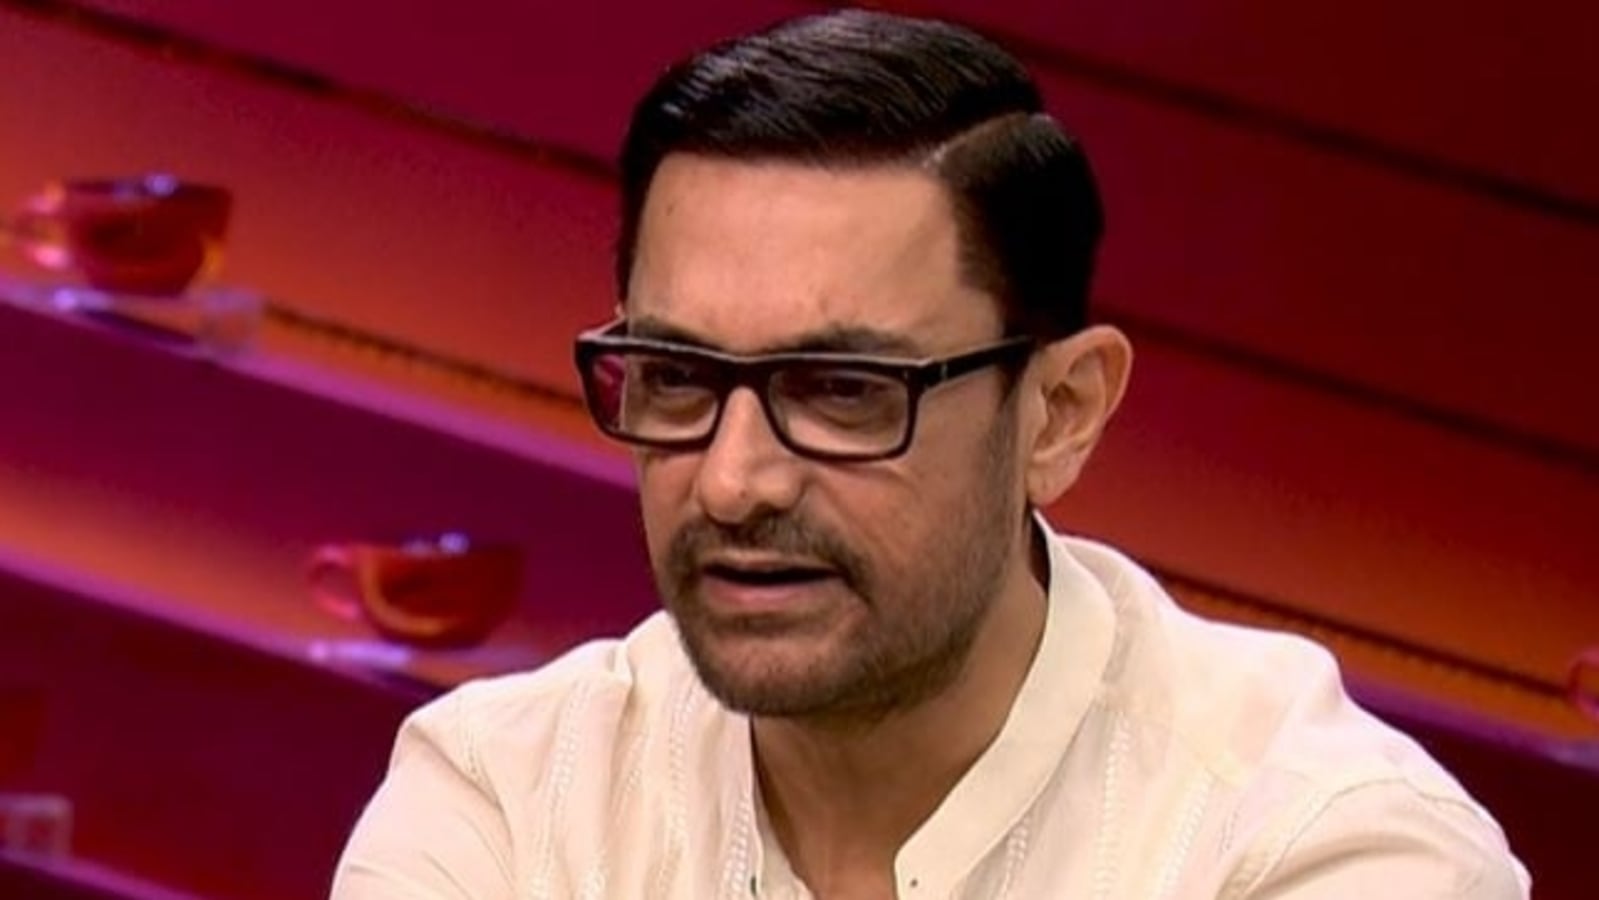 request-aamir-khan-not-to-hurt-religious-sentiments-mp-minister-on-ad-for-bank